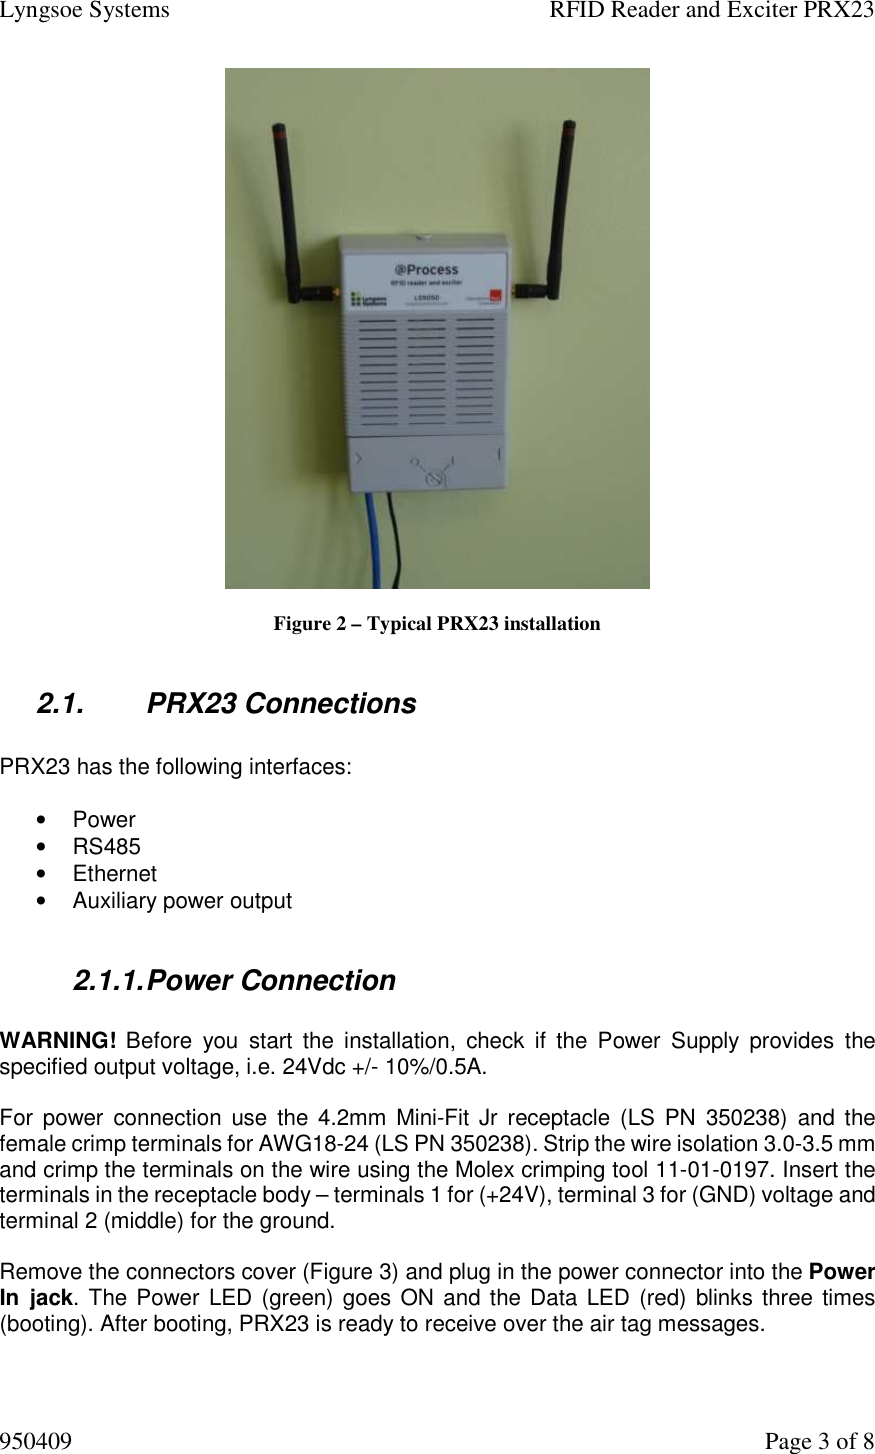 Lyngsoe Systems    RFID Reader and Exciter PRX23 950409    Page 3 of 8   Figure 2 – Typical PRX23 installation  2.1.  PRX23 Connections  PRX23 has the following interfaces:  •  Power •  RS485 •  Ethernet •  Auxiliary power output  2.1.1. Power Connection   WARNING!  Before  you  start  the  installation,  check  if  the  Power  Supply  provides  the specified output voltage, i.e. 24Vdc +/- 10%/0.5A.  For  power  connection use  the  4.2mm  Mini-Fit Jr  receptacle (LS PN  350238)  and  the female crimp terminals for AWG18-24 (LS PN 350238). Strip the wire isolation 3.0-3.5 mm and crimp the terminals on the wire using the Molex crimping tool 11-01-0197. Insert the terminals in the receptacle body – terminals 1 for (+24V), terminal 3 for (GND) voltage and terminal 2 (middle) for the ground.   Remove the connectors cover (Figure 3) and plug in the power connector into the Power In  jack. The Power LED (green) goes ON and the Data LED (red)  blinks three times (booting). After booting, PRX23 is ready to receive over the air tag messages.  